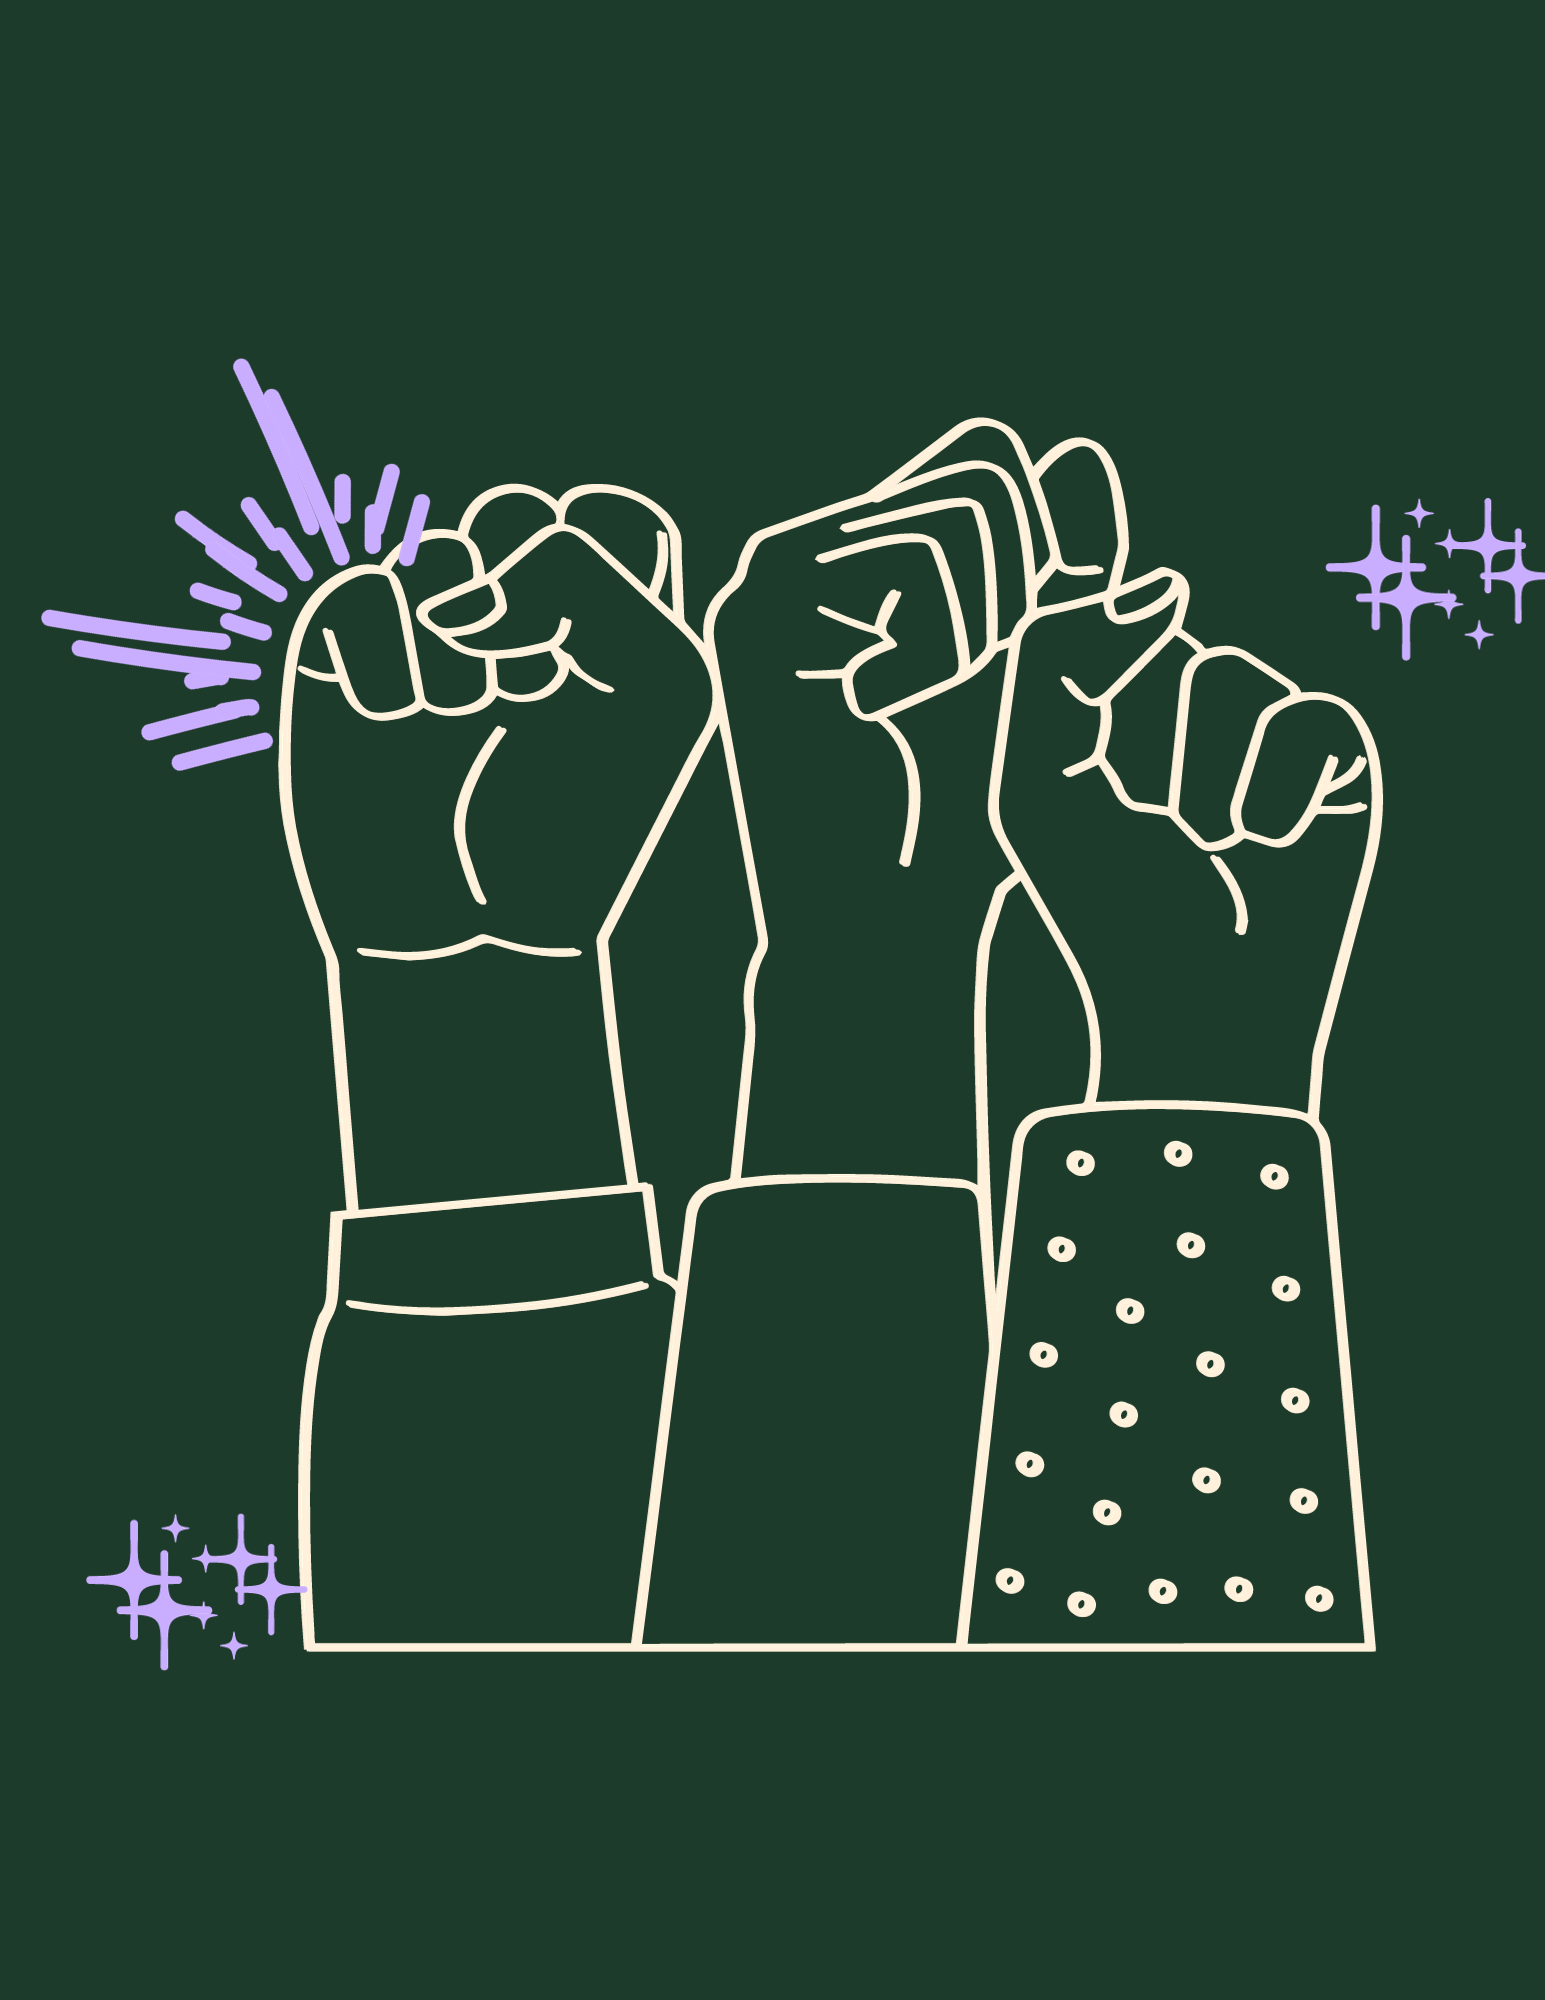 fists-graphic.png